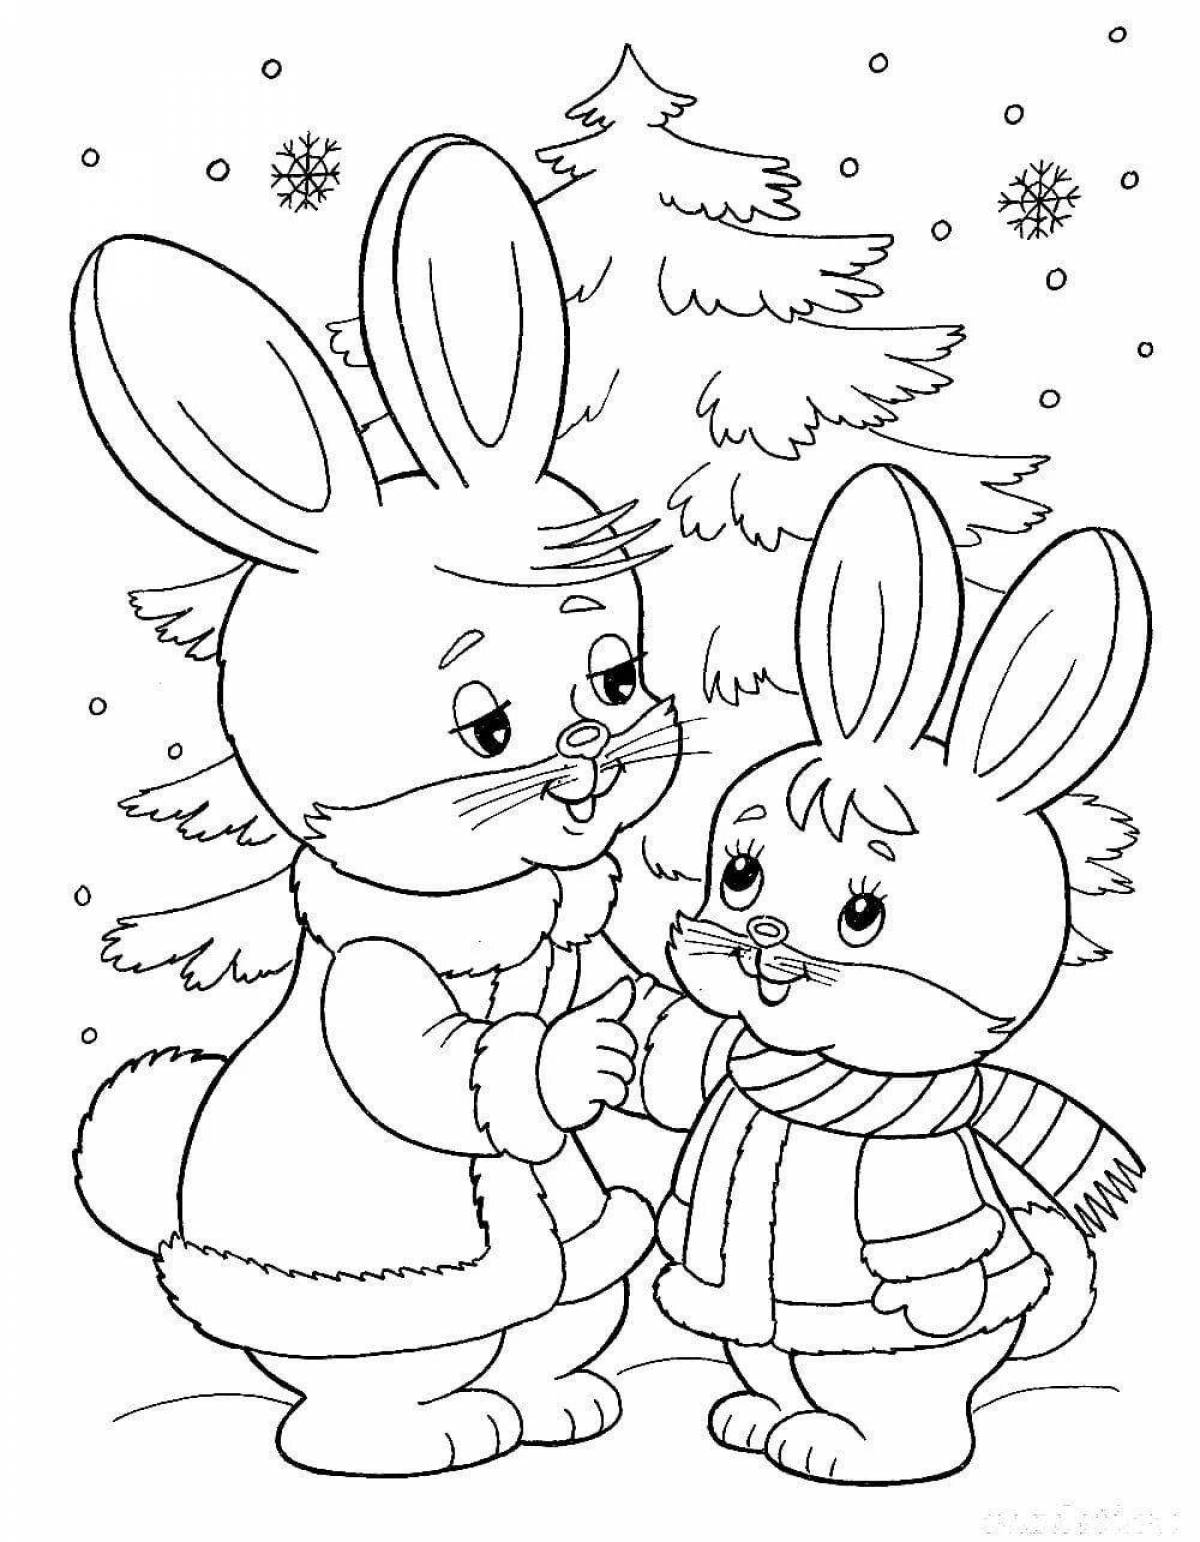 Jolly bunny coloring book in winter